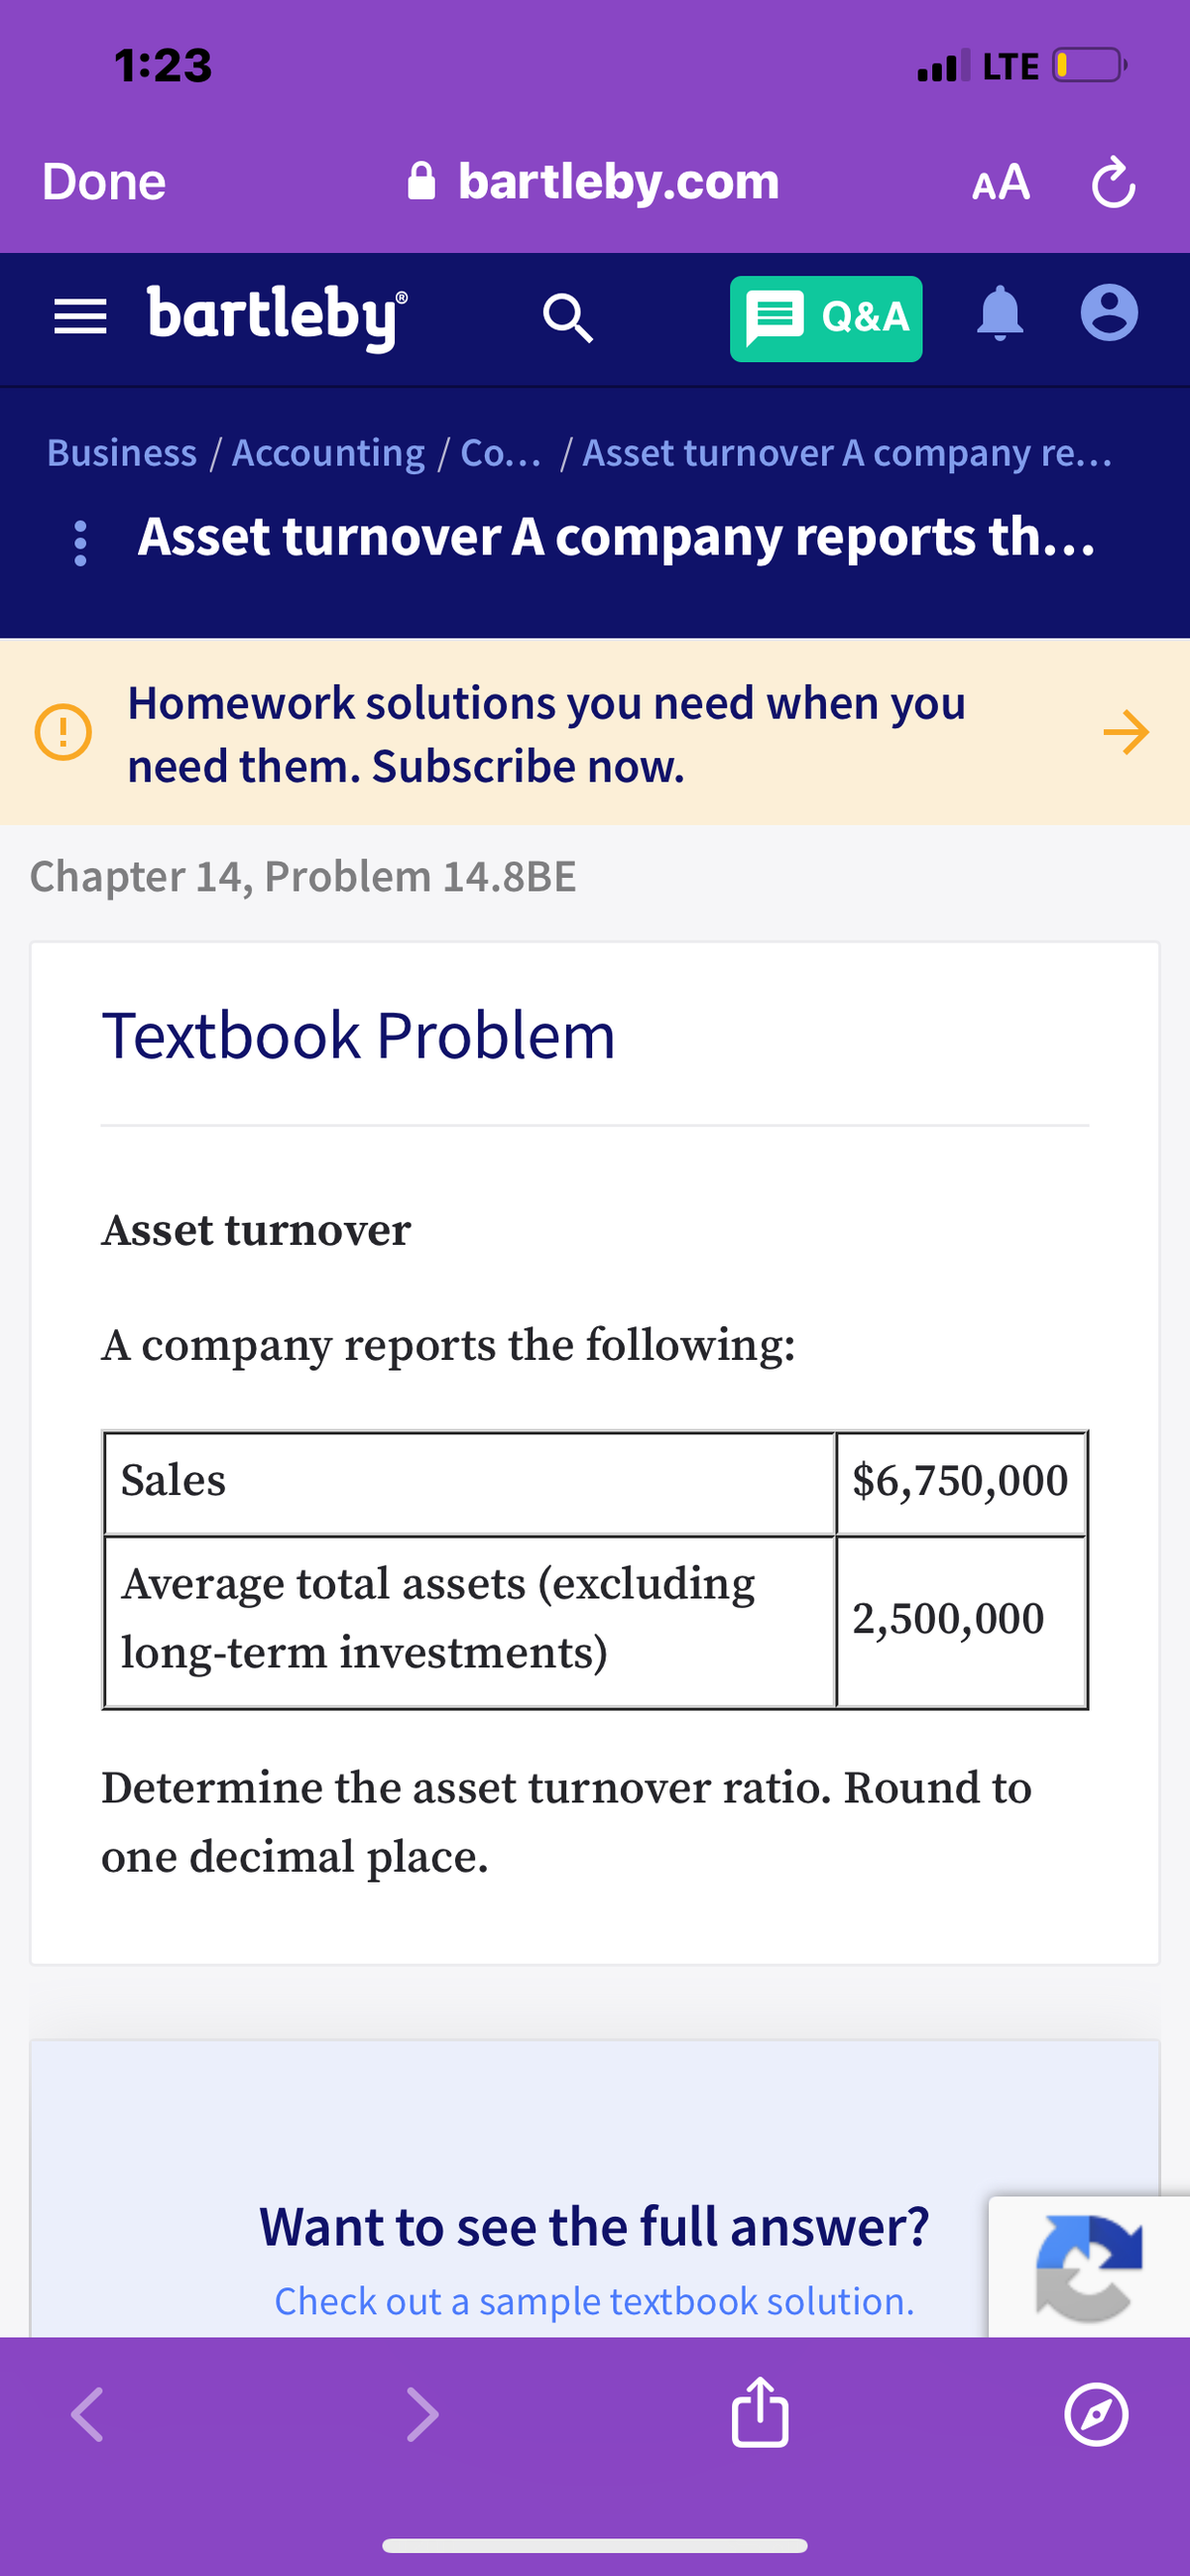 1:23
ul LTE O
Done
A bartleby.com
AA C
= bartleby
E Q&A
Business / Accounting / Co.. / Asset turnover A company re..
: Asset turnover A company reports th...
Homework solutions you need when you
->
need them. Subscribe now.
Chapter 14, Problem 14.8BE
Textbook Problem
Asset turnover
A company reports the following:
Sales
$6,750,000
Average total assets (excluding
2,500,000
long-term investments)
Determine the asset turnover ratio. Round to
one decimal place.
Want to see the full answer?
Check out a sample textbook solution.
